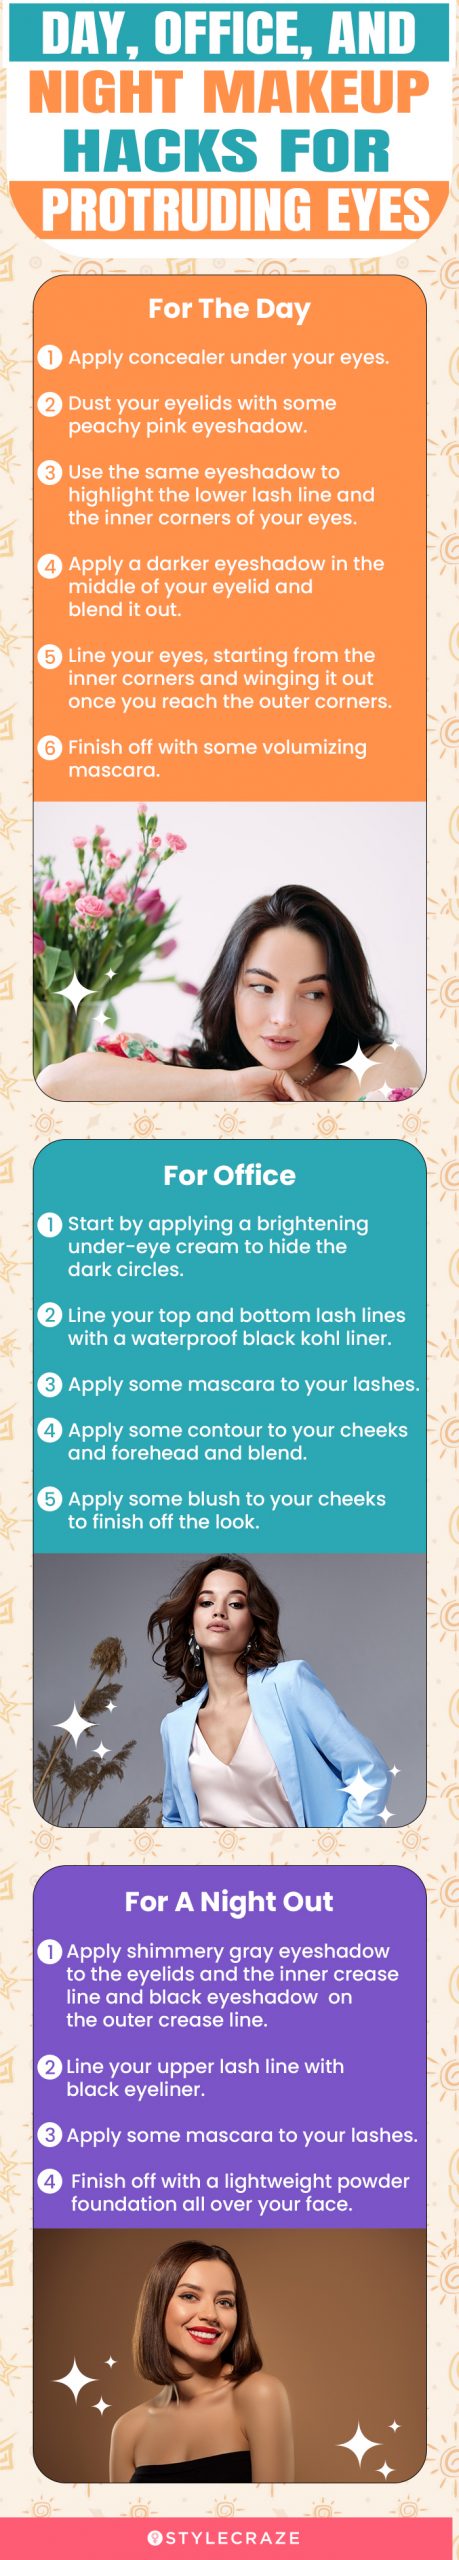 day, office, and night makeup hacks for protruding eyes (infographic)